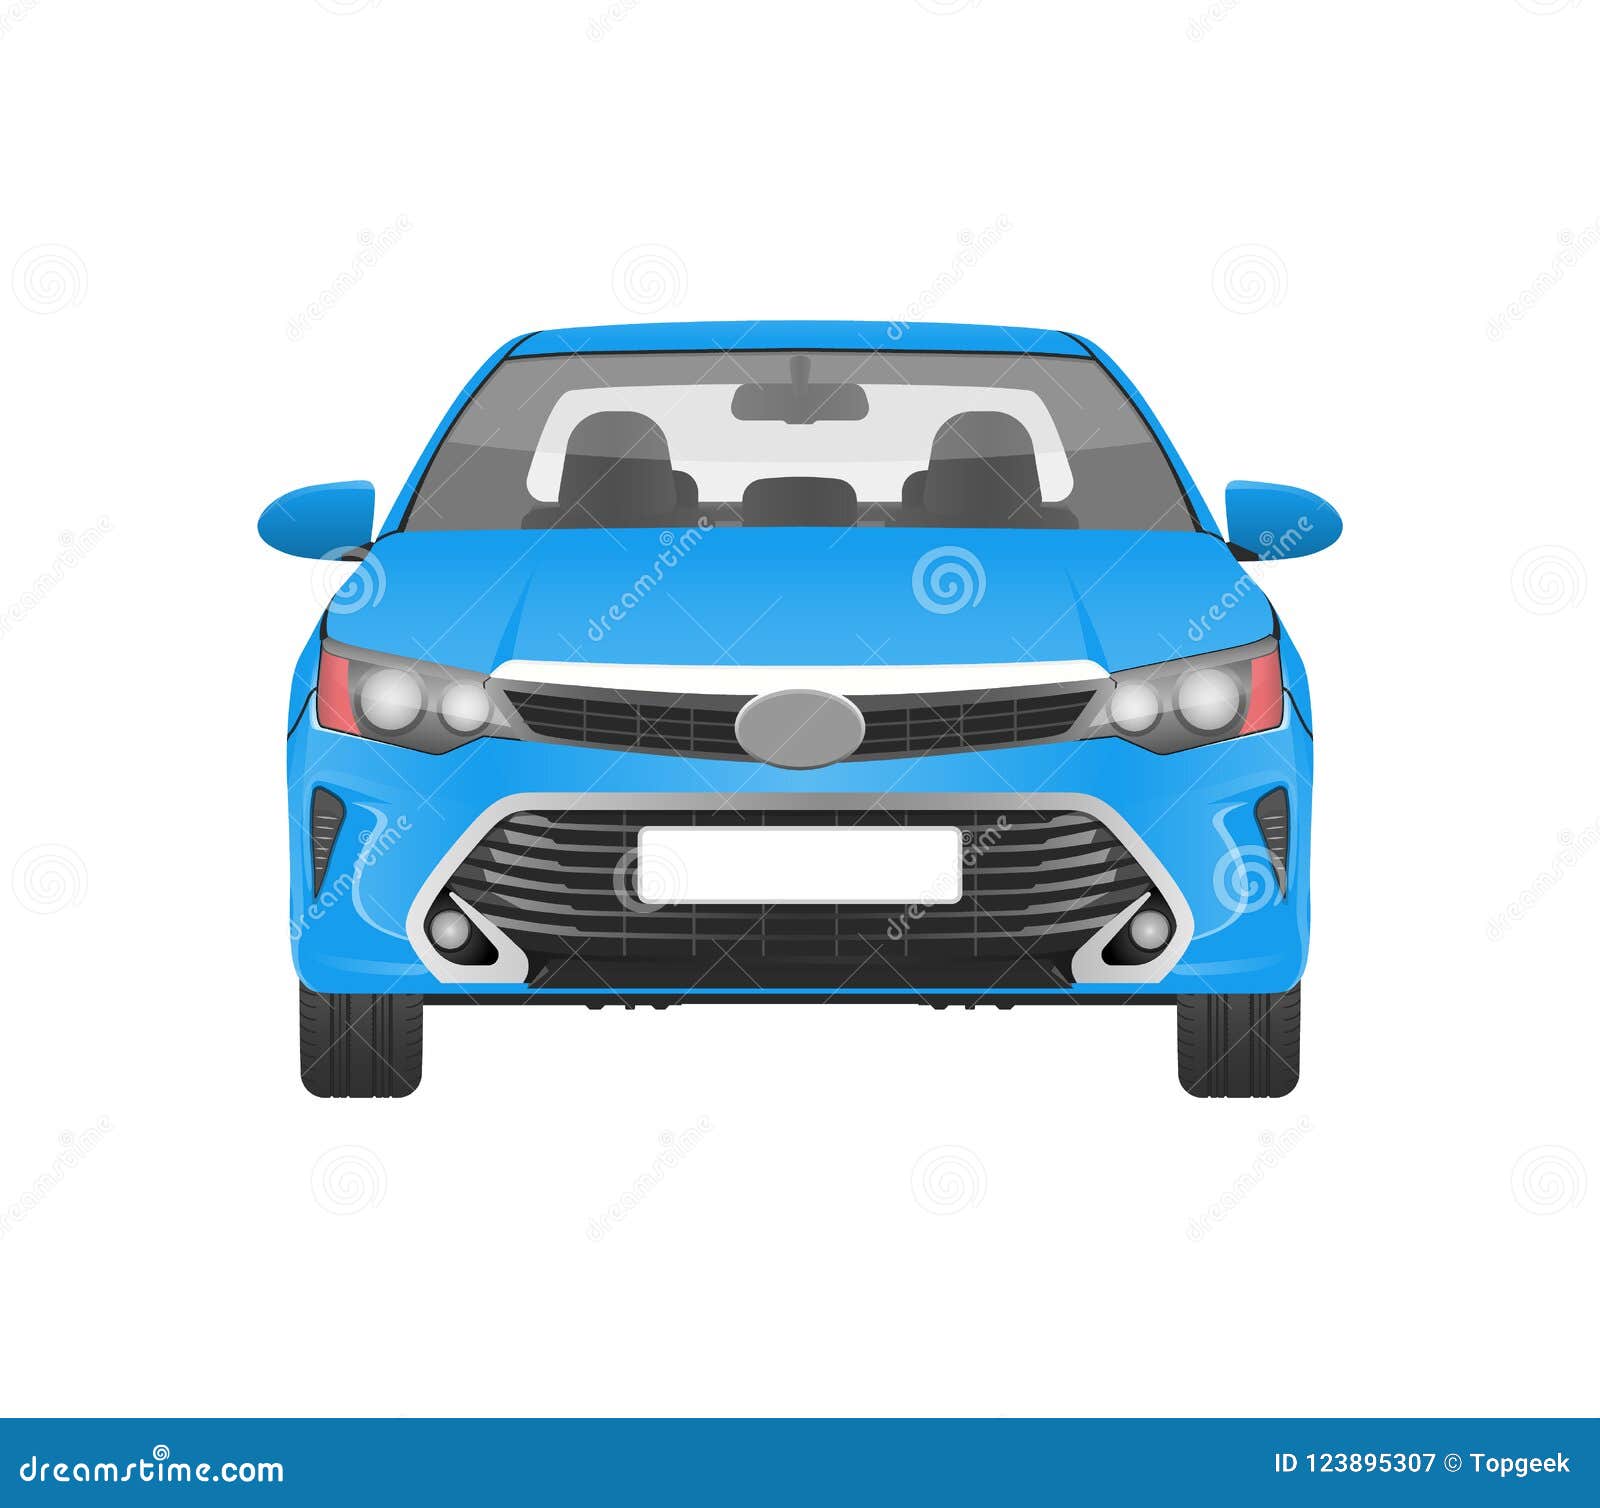 modern practical car in blue corpus front view